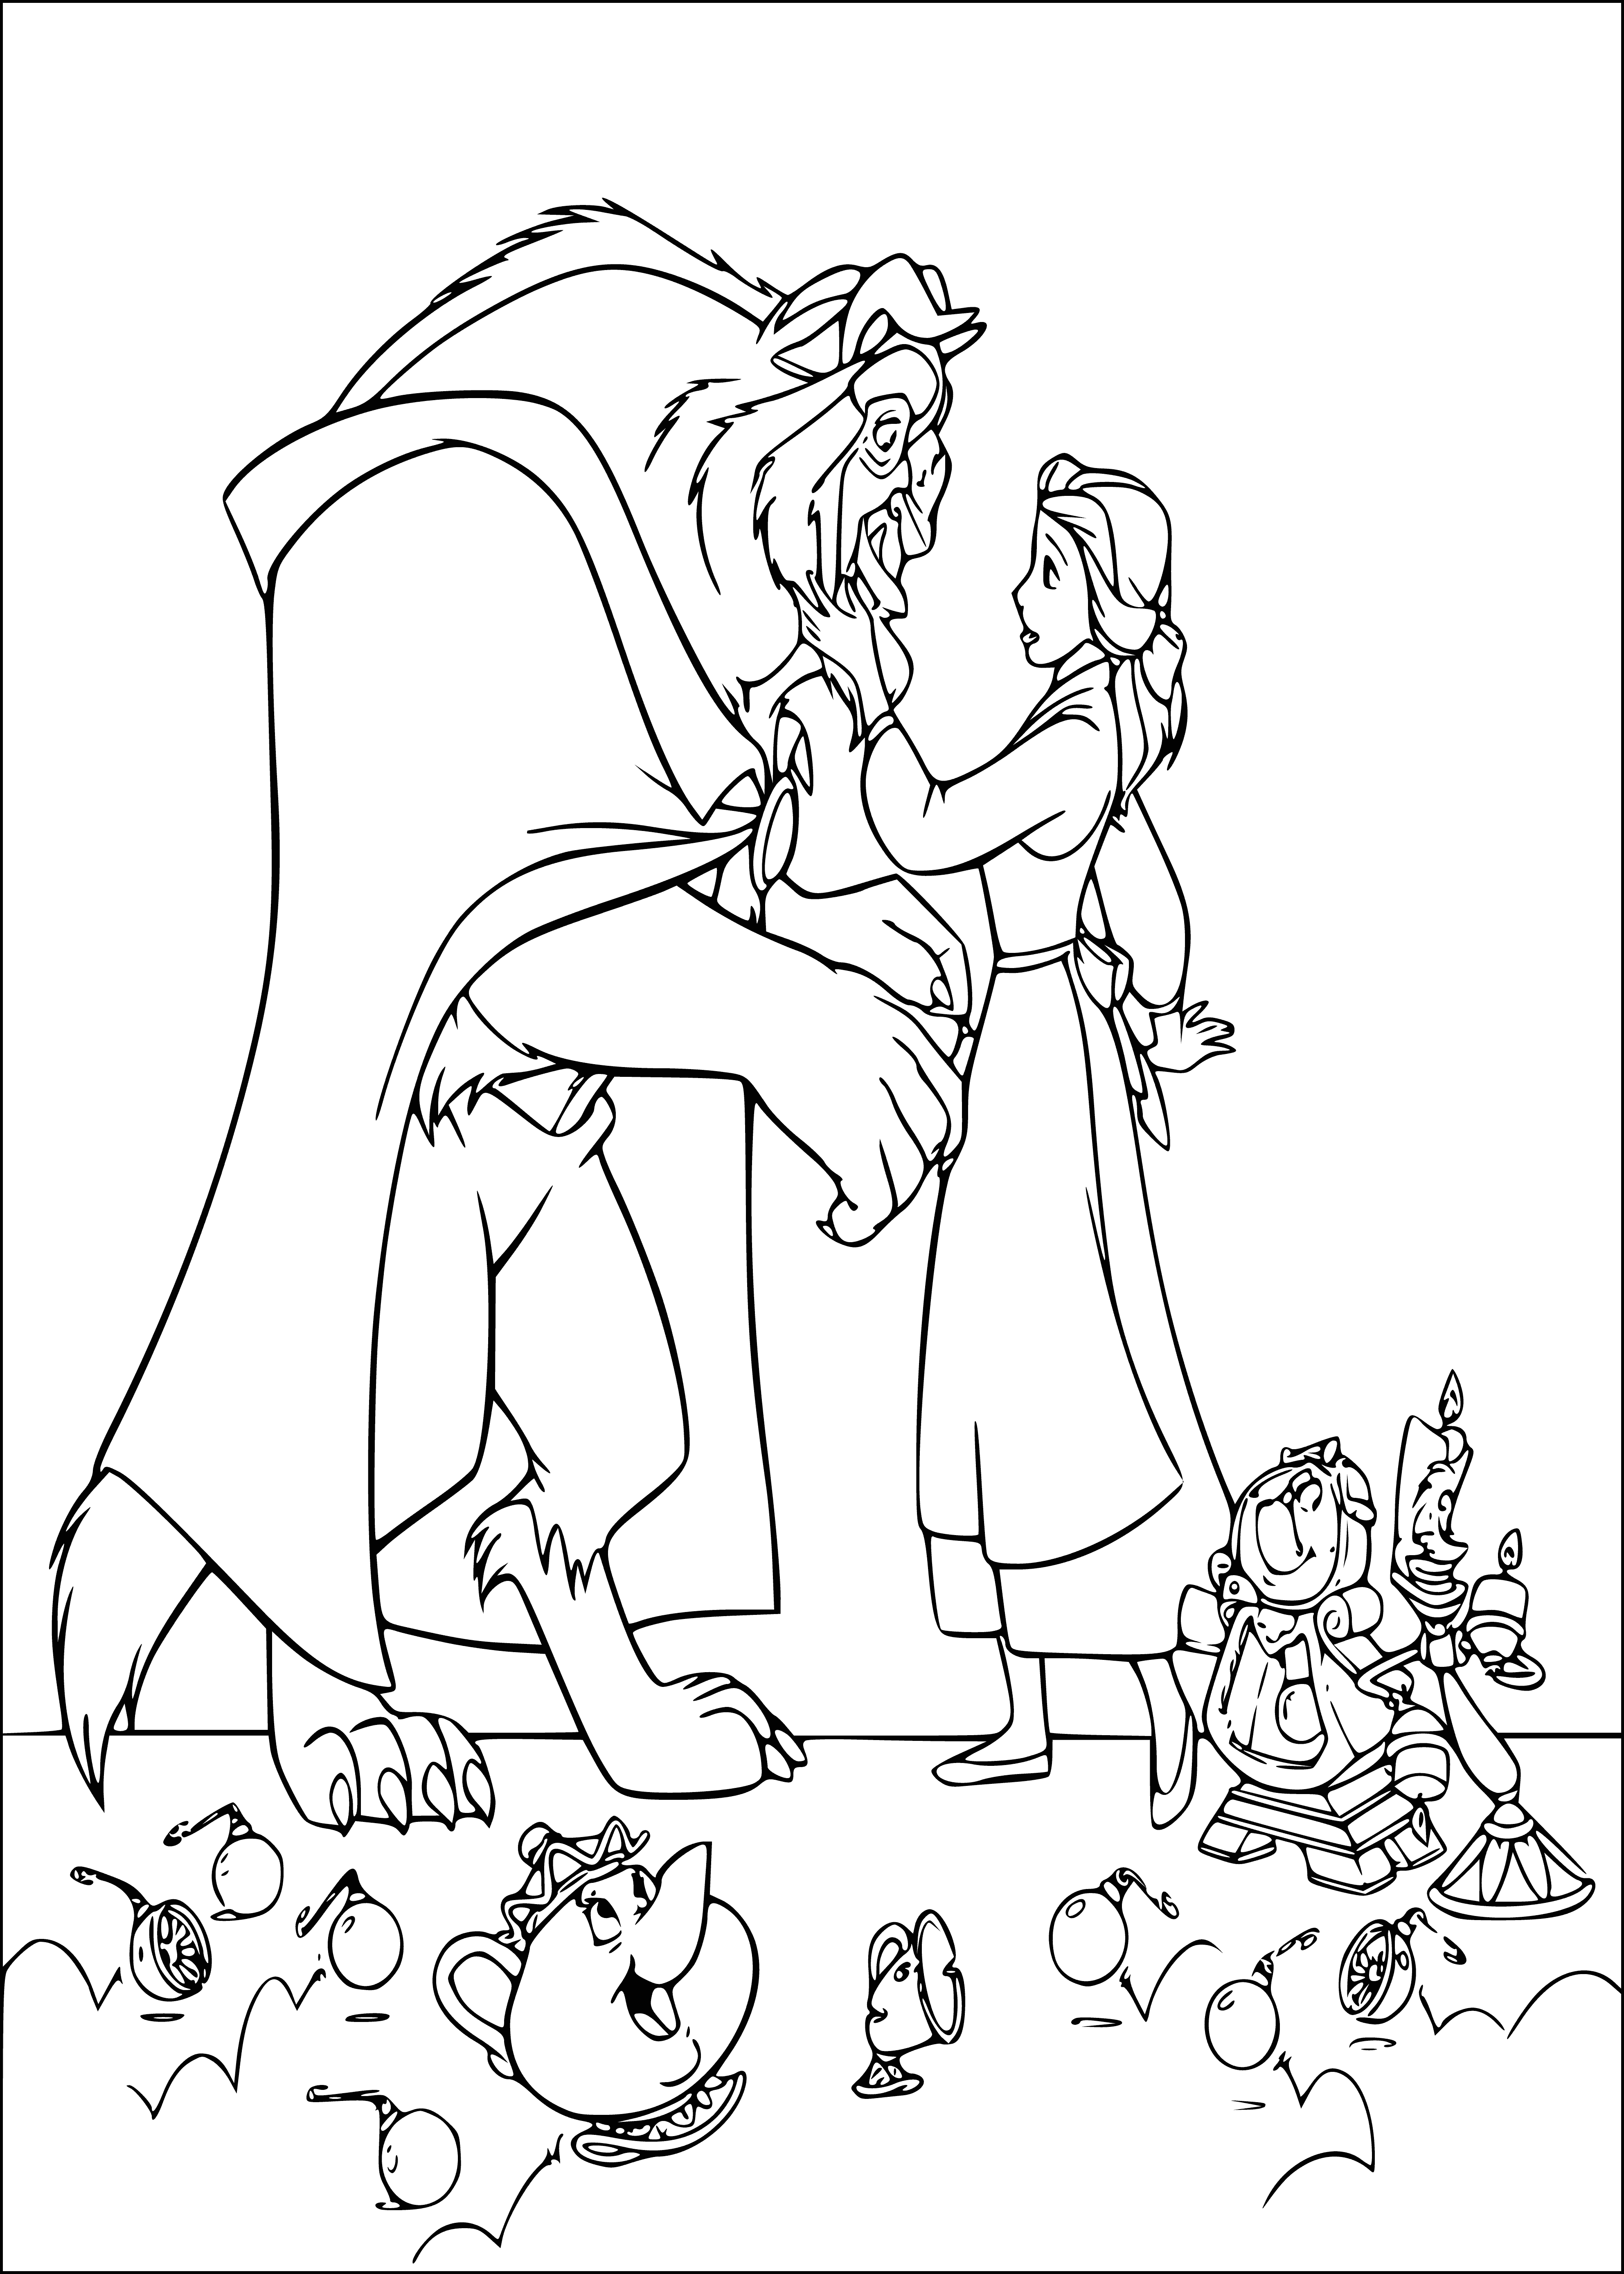 coloring page: A woman stands surrounded by two white wolves at a castle in the moonlight.